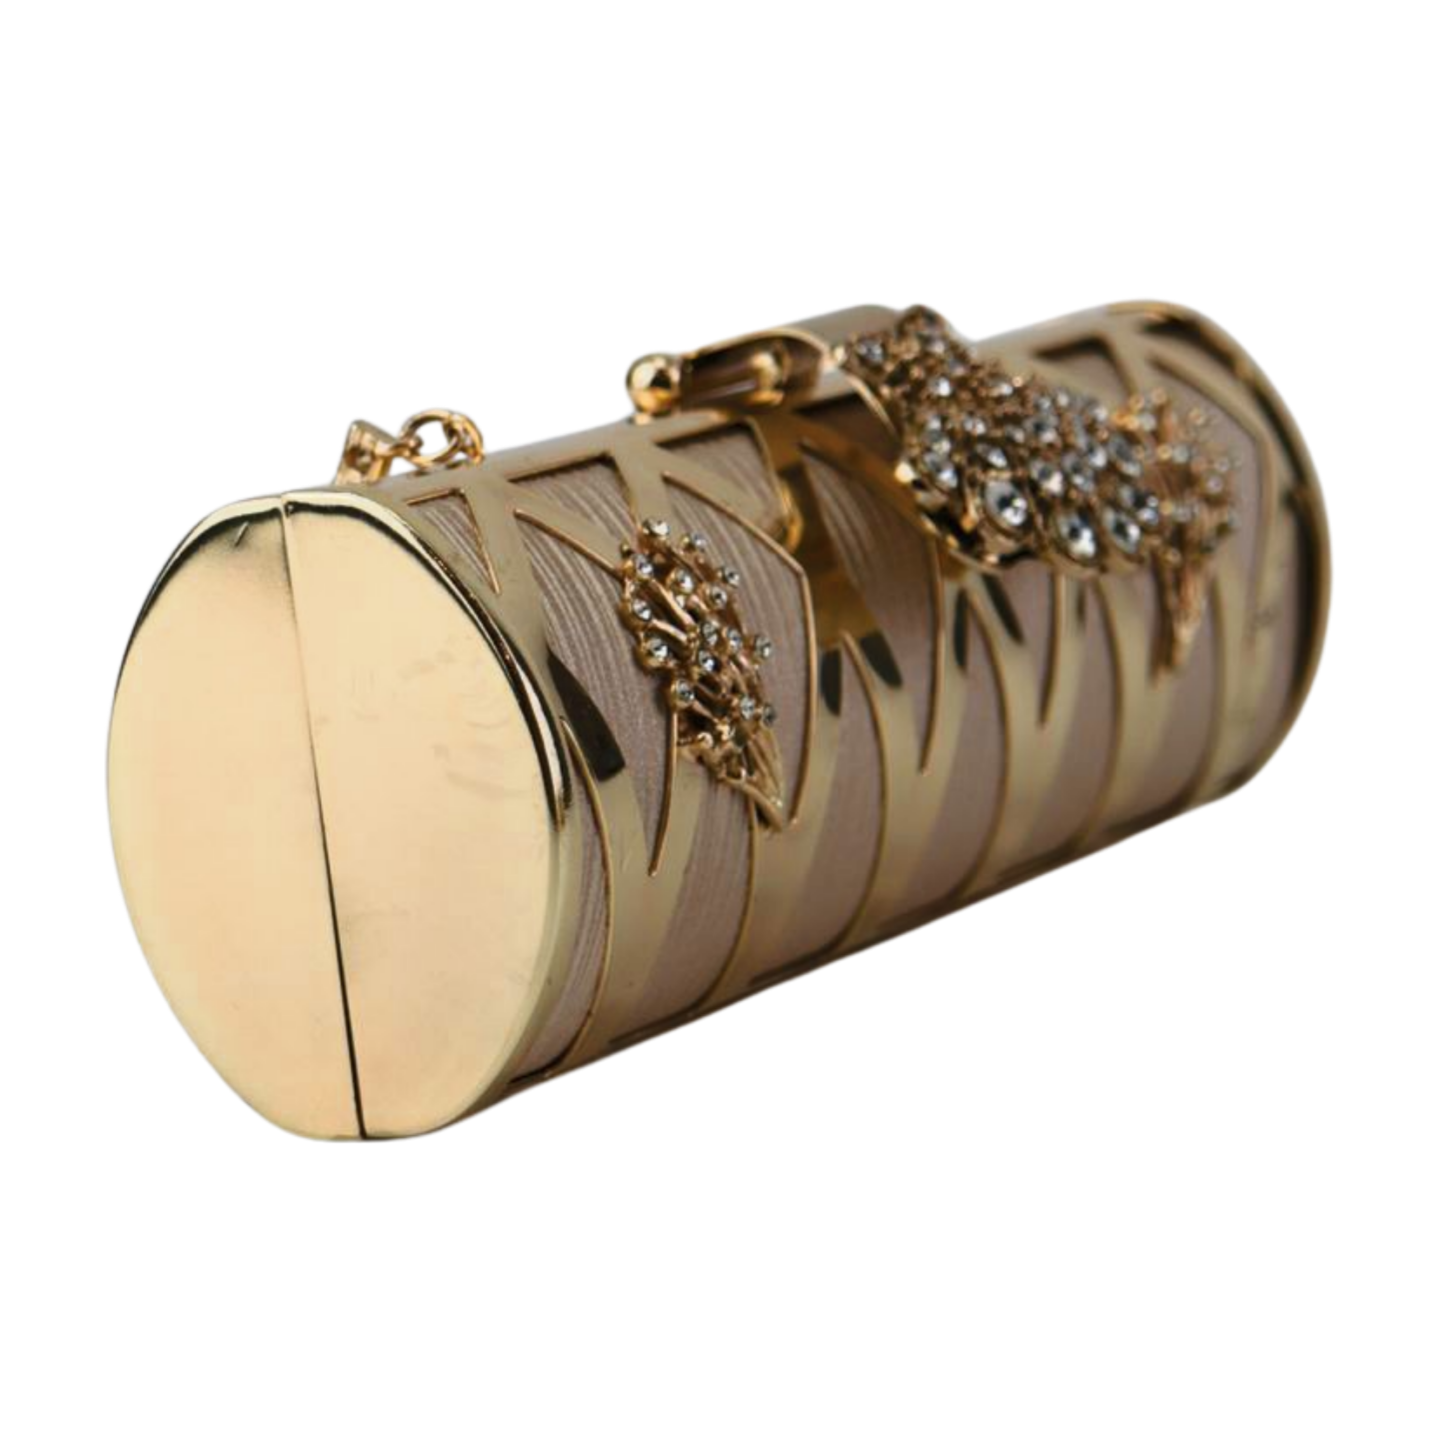 Stylish Glittering Gold Clutch Bag with Flowers and Swarovski Crystals For Wedding And Party